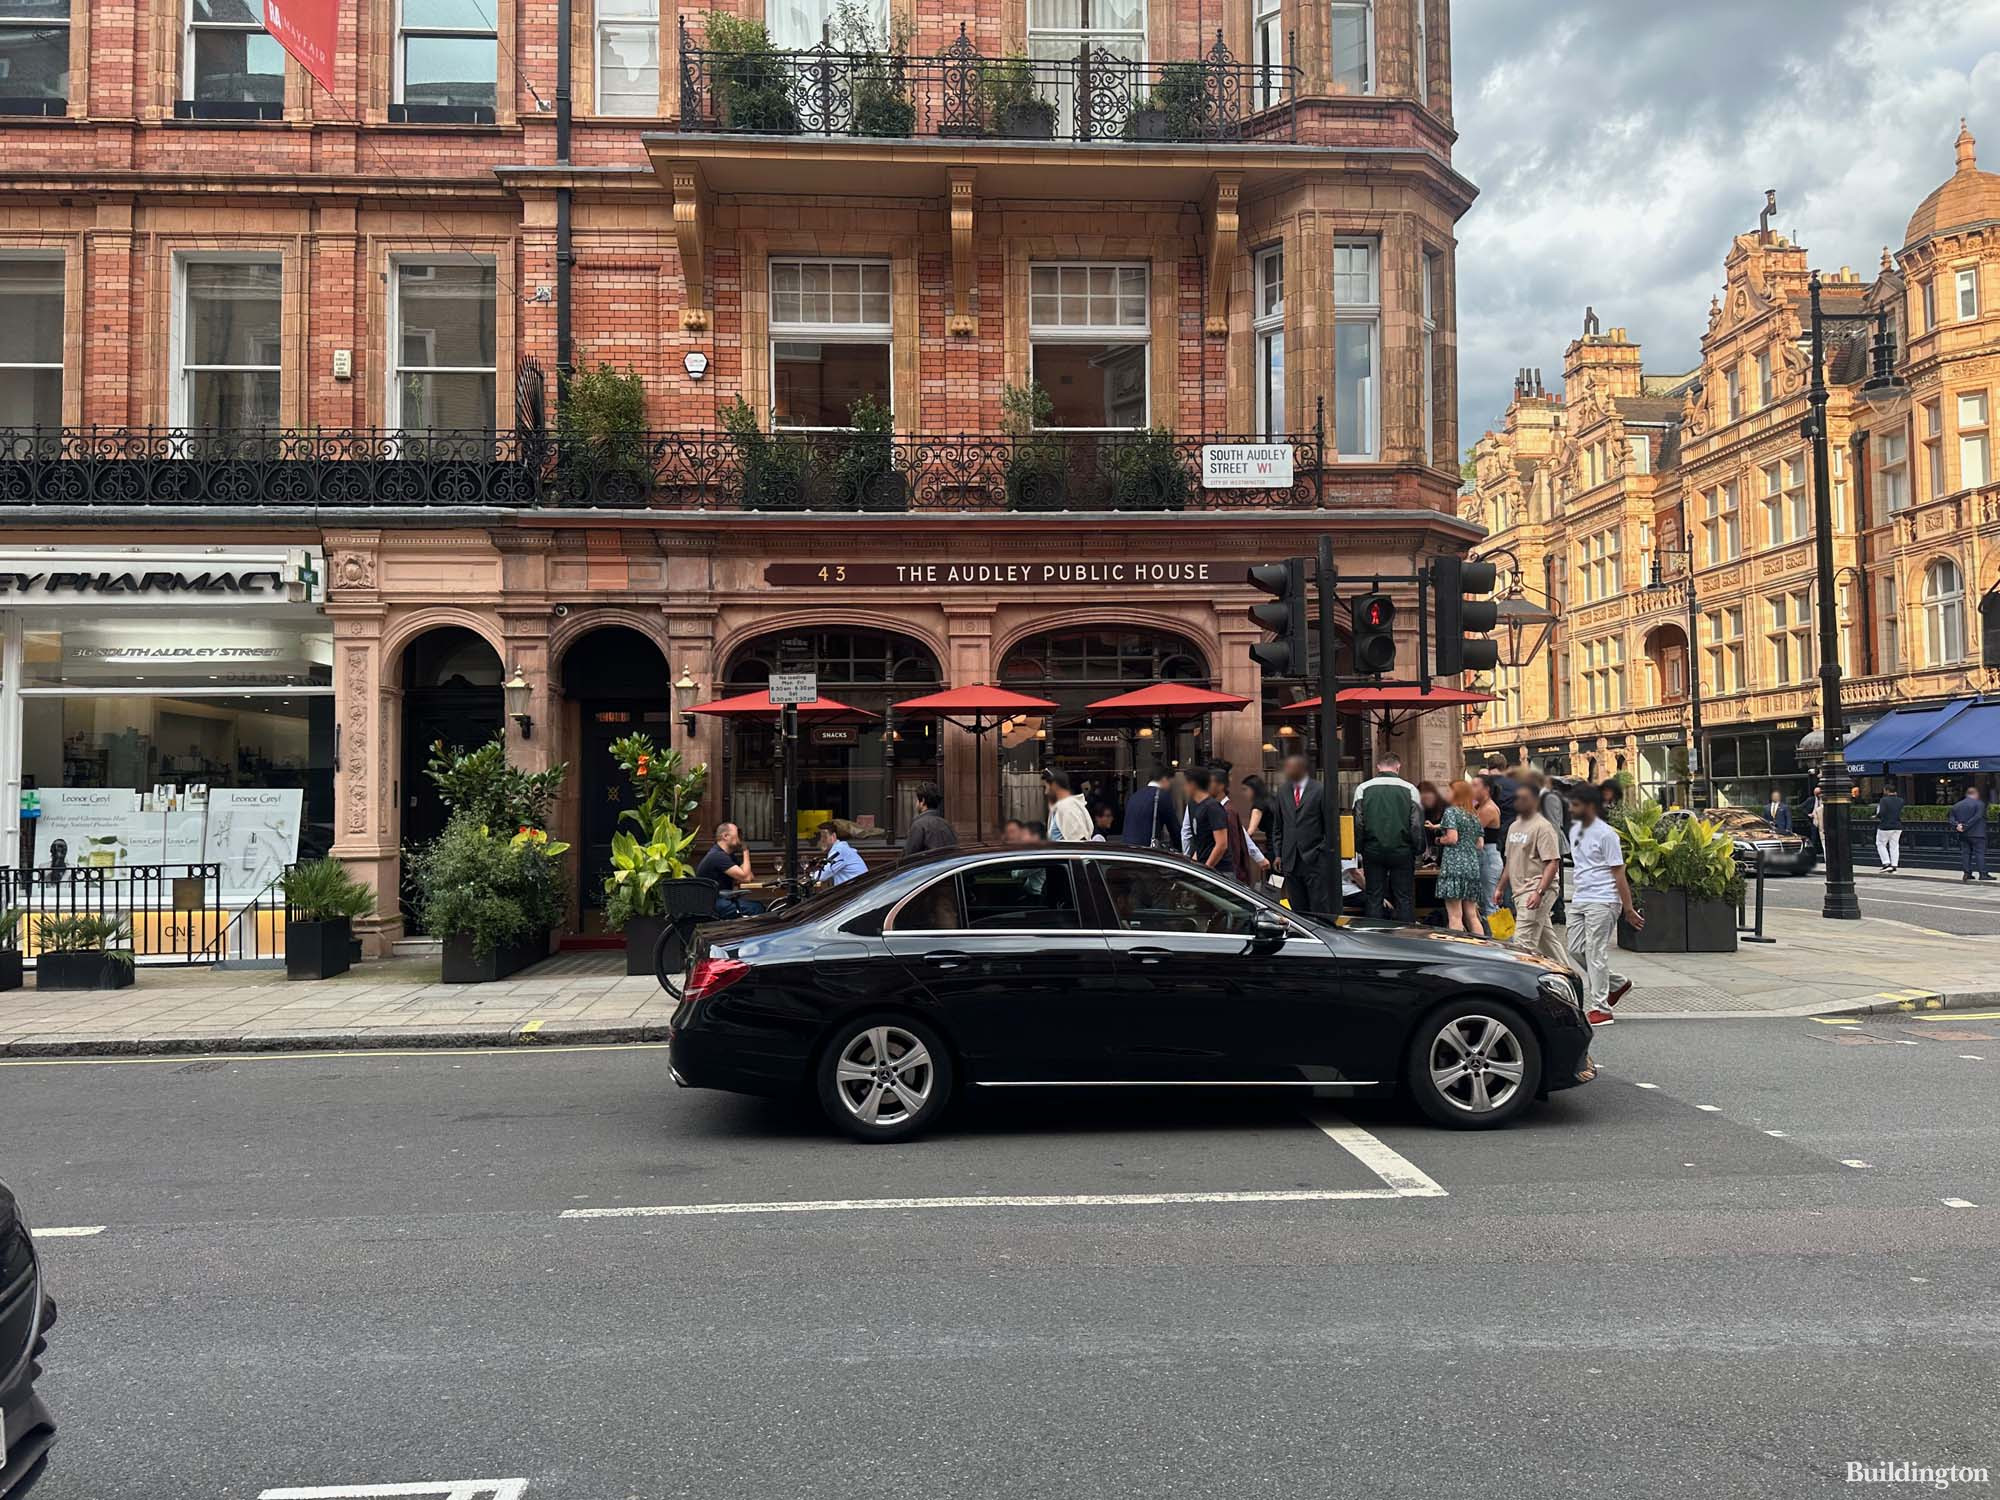 The Audley Public House - pub and restaurant on the corner of South Audley and Mount Street in Mayfair, London W1.